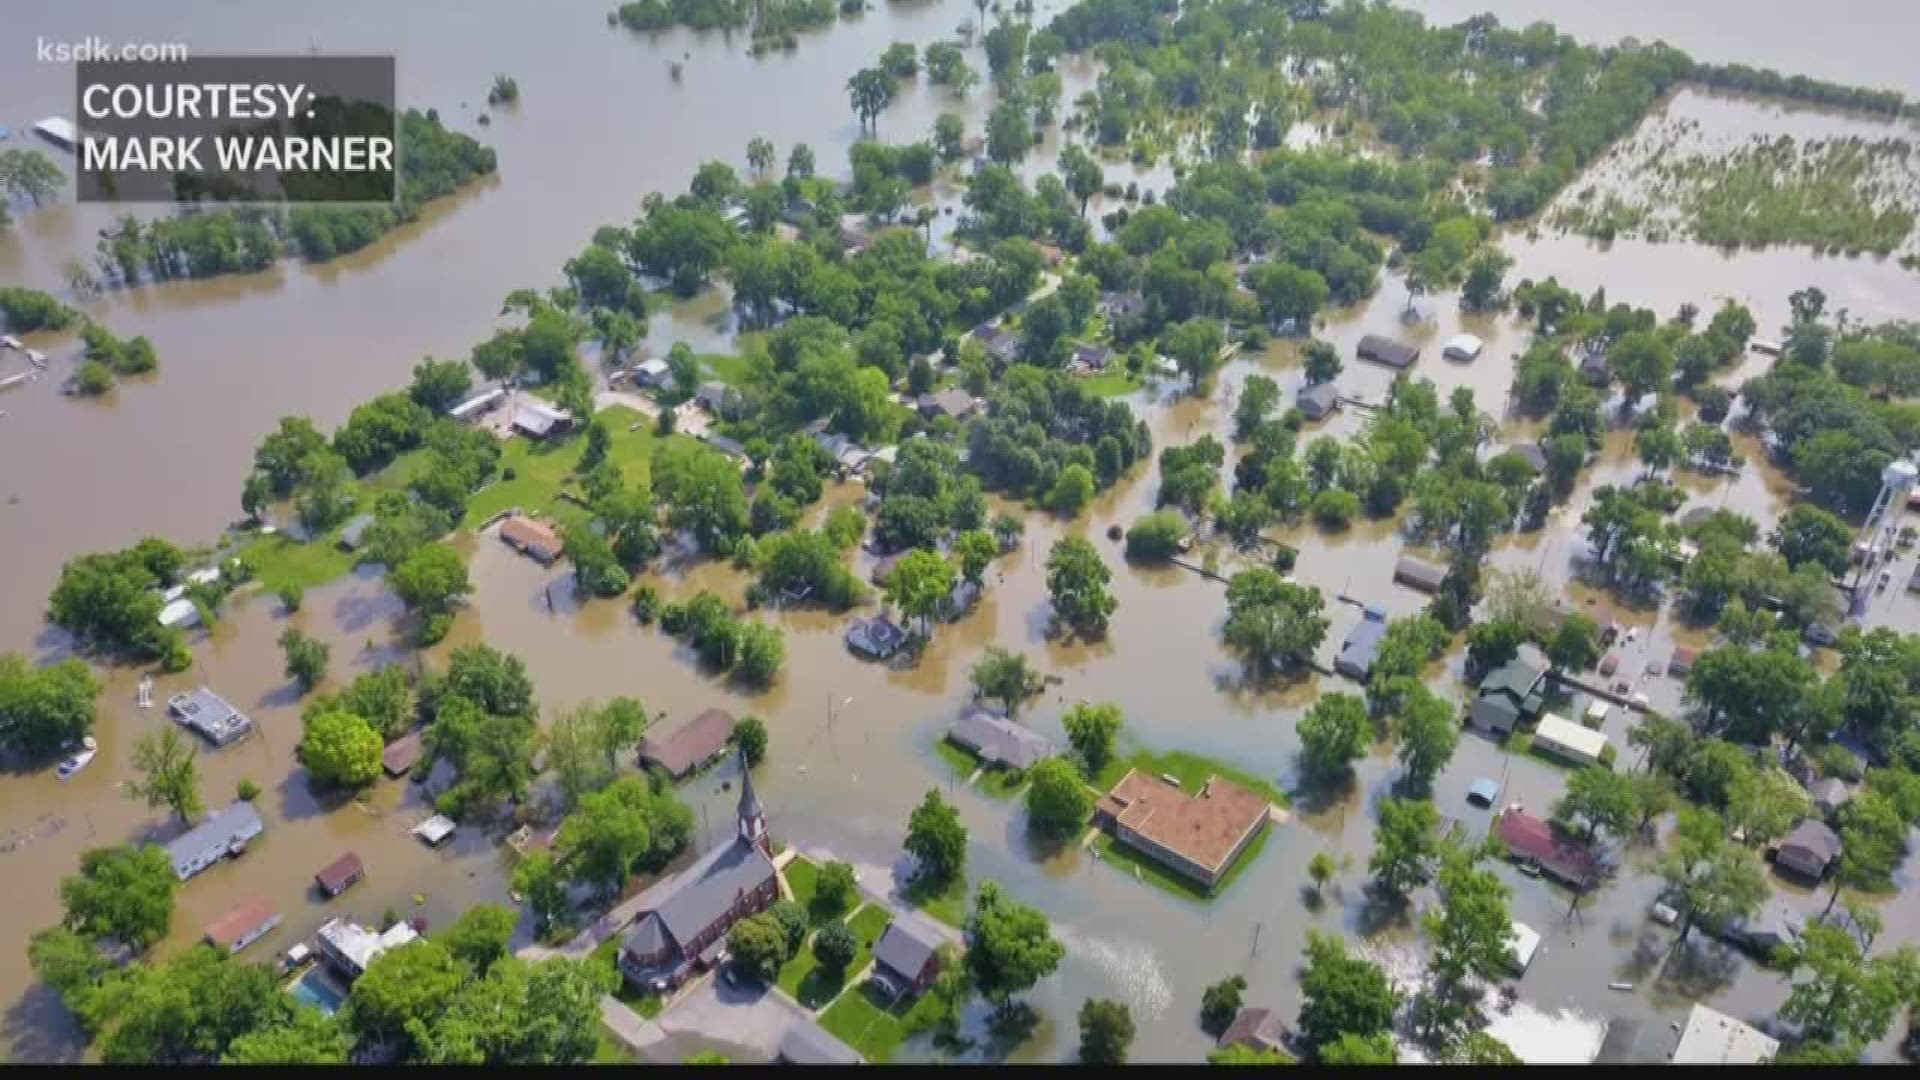 Flood waters have crested, but in towns along the Mississippi and Missouri Rivers, flooding will continue to cause headaches for homeowners.